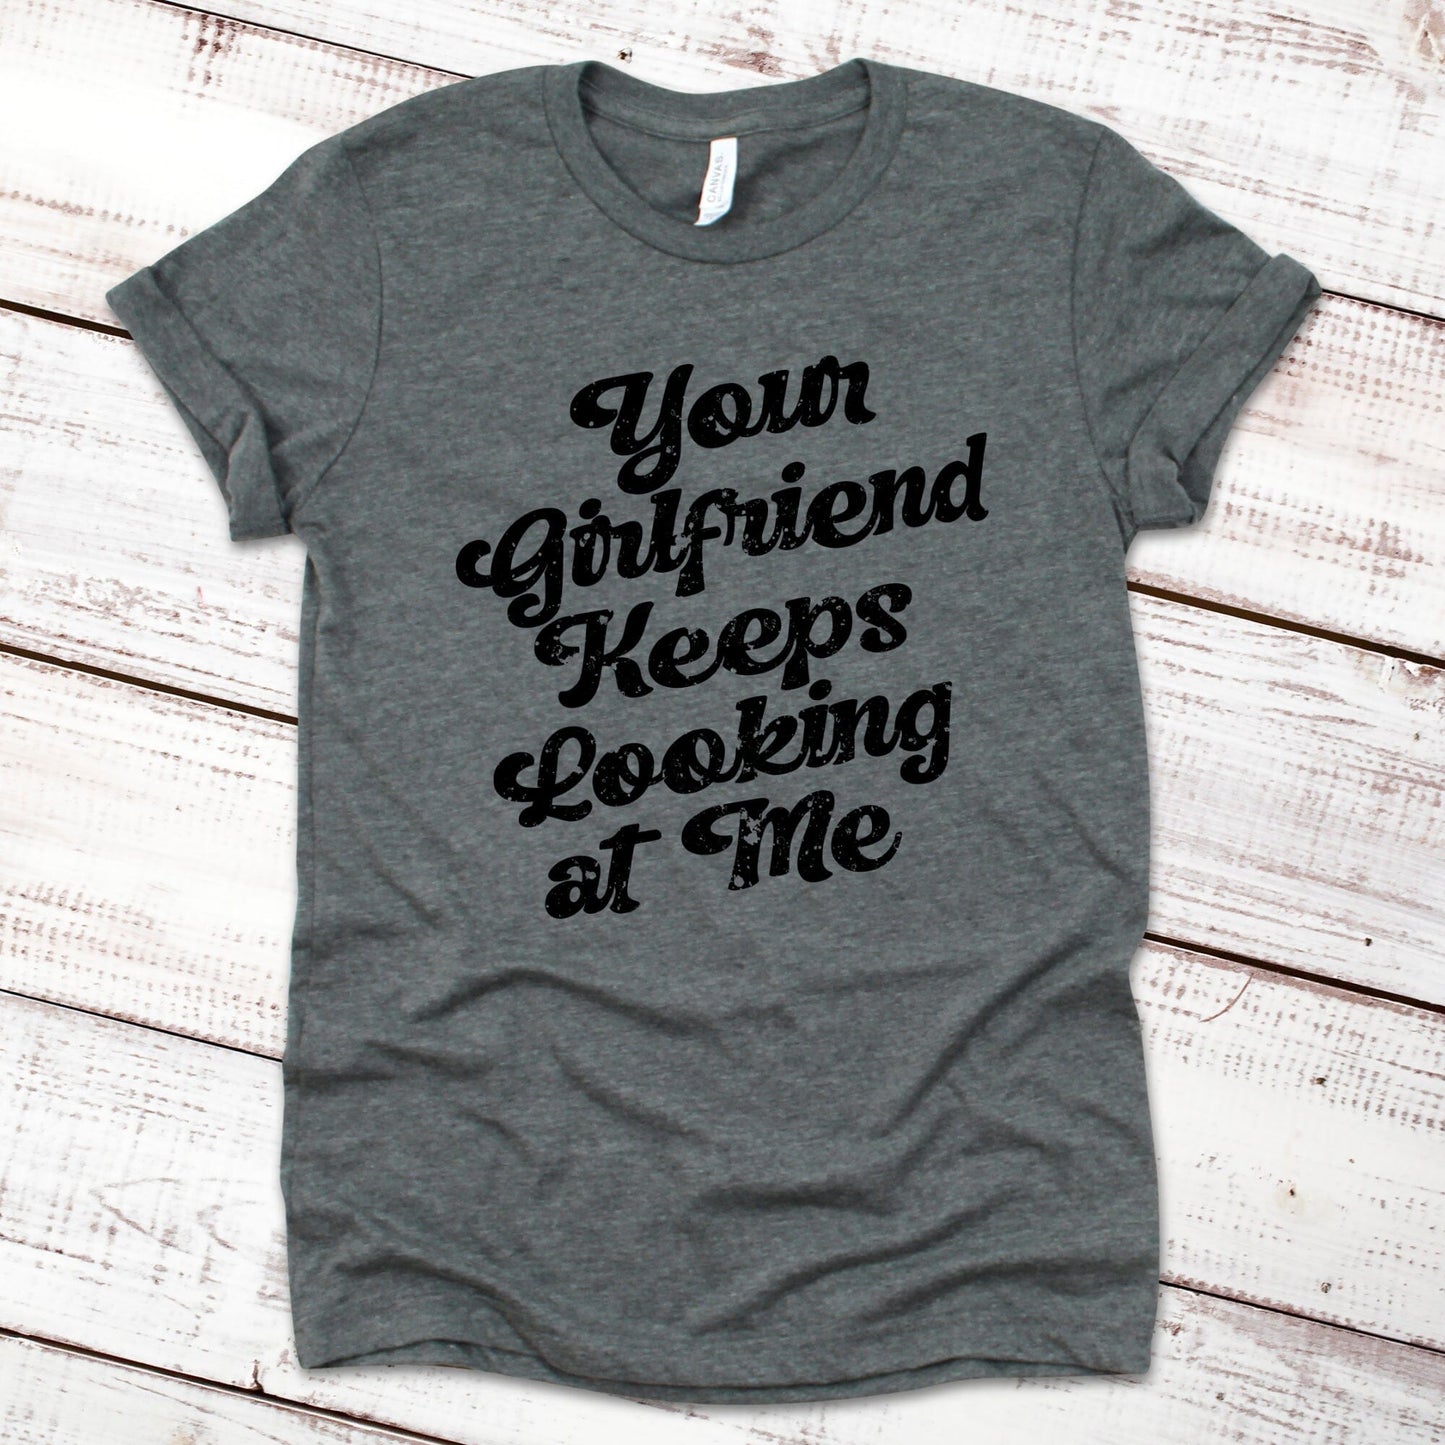 Your Girlfriend Keeps Looking at Me Funny Shirt Imprint Maker Deep Heather Gray XS 